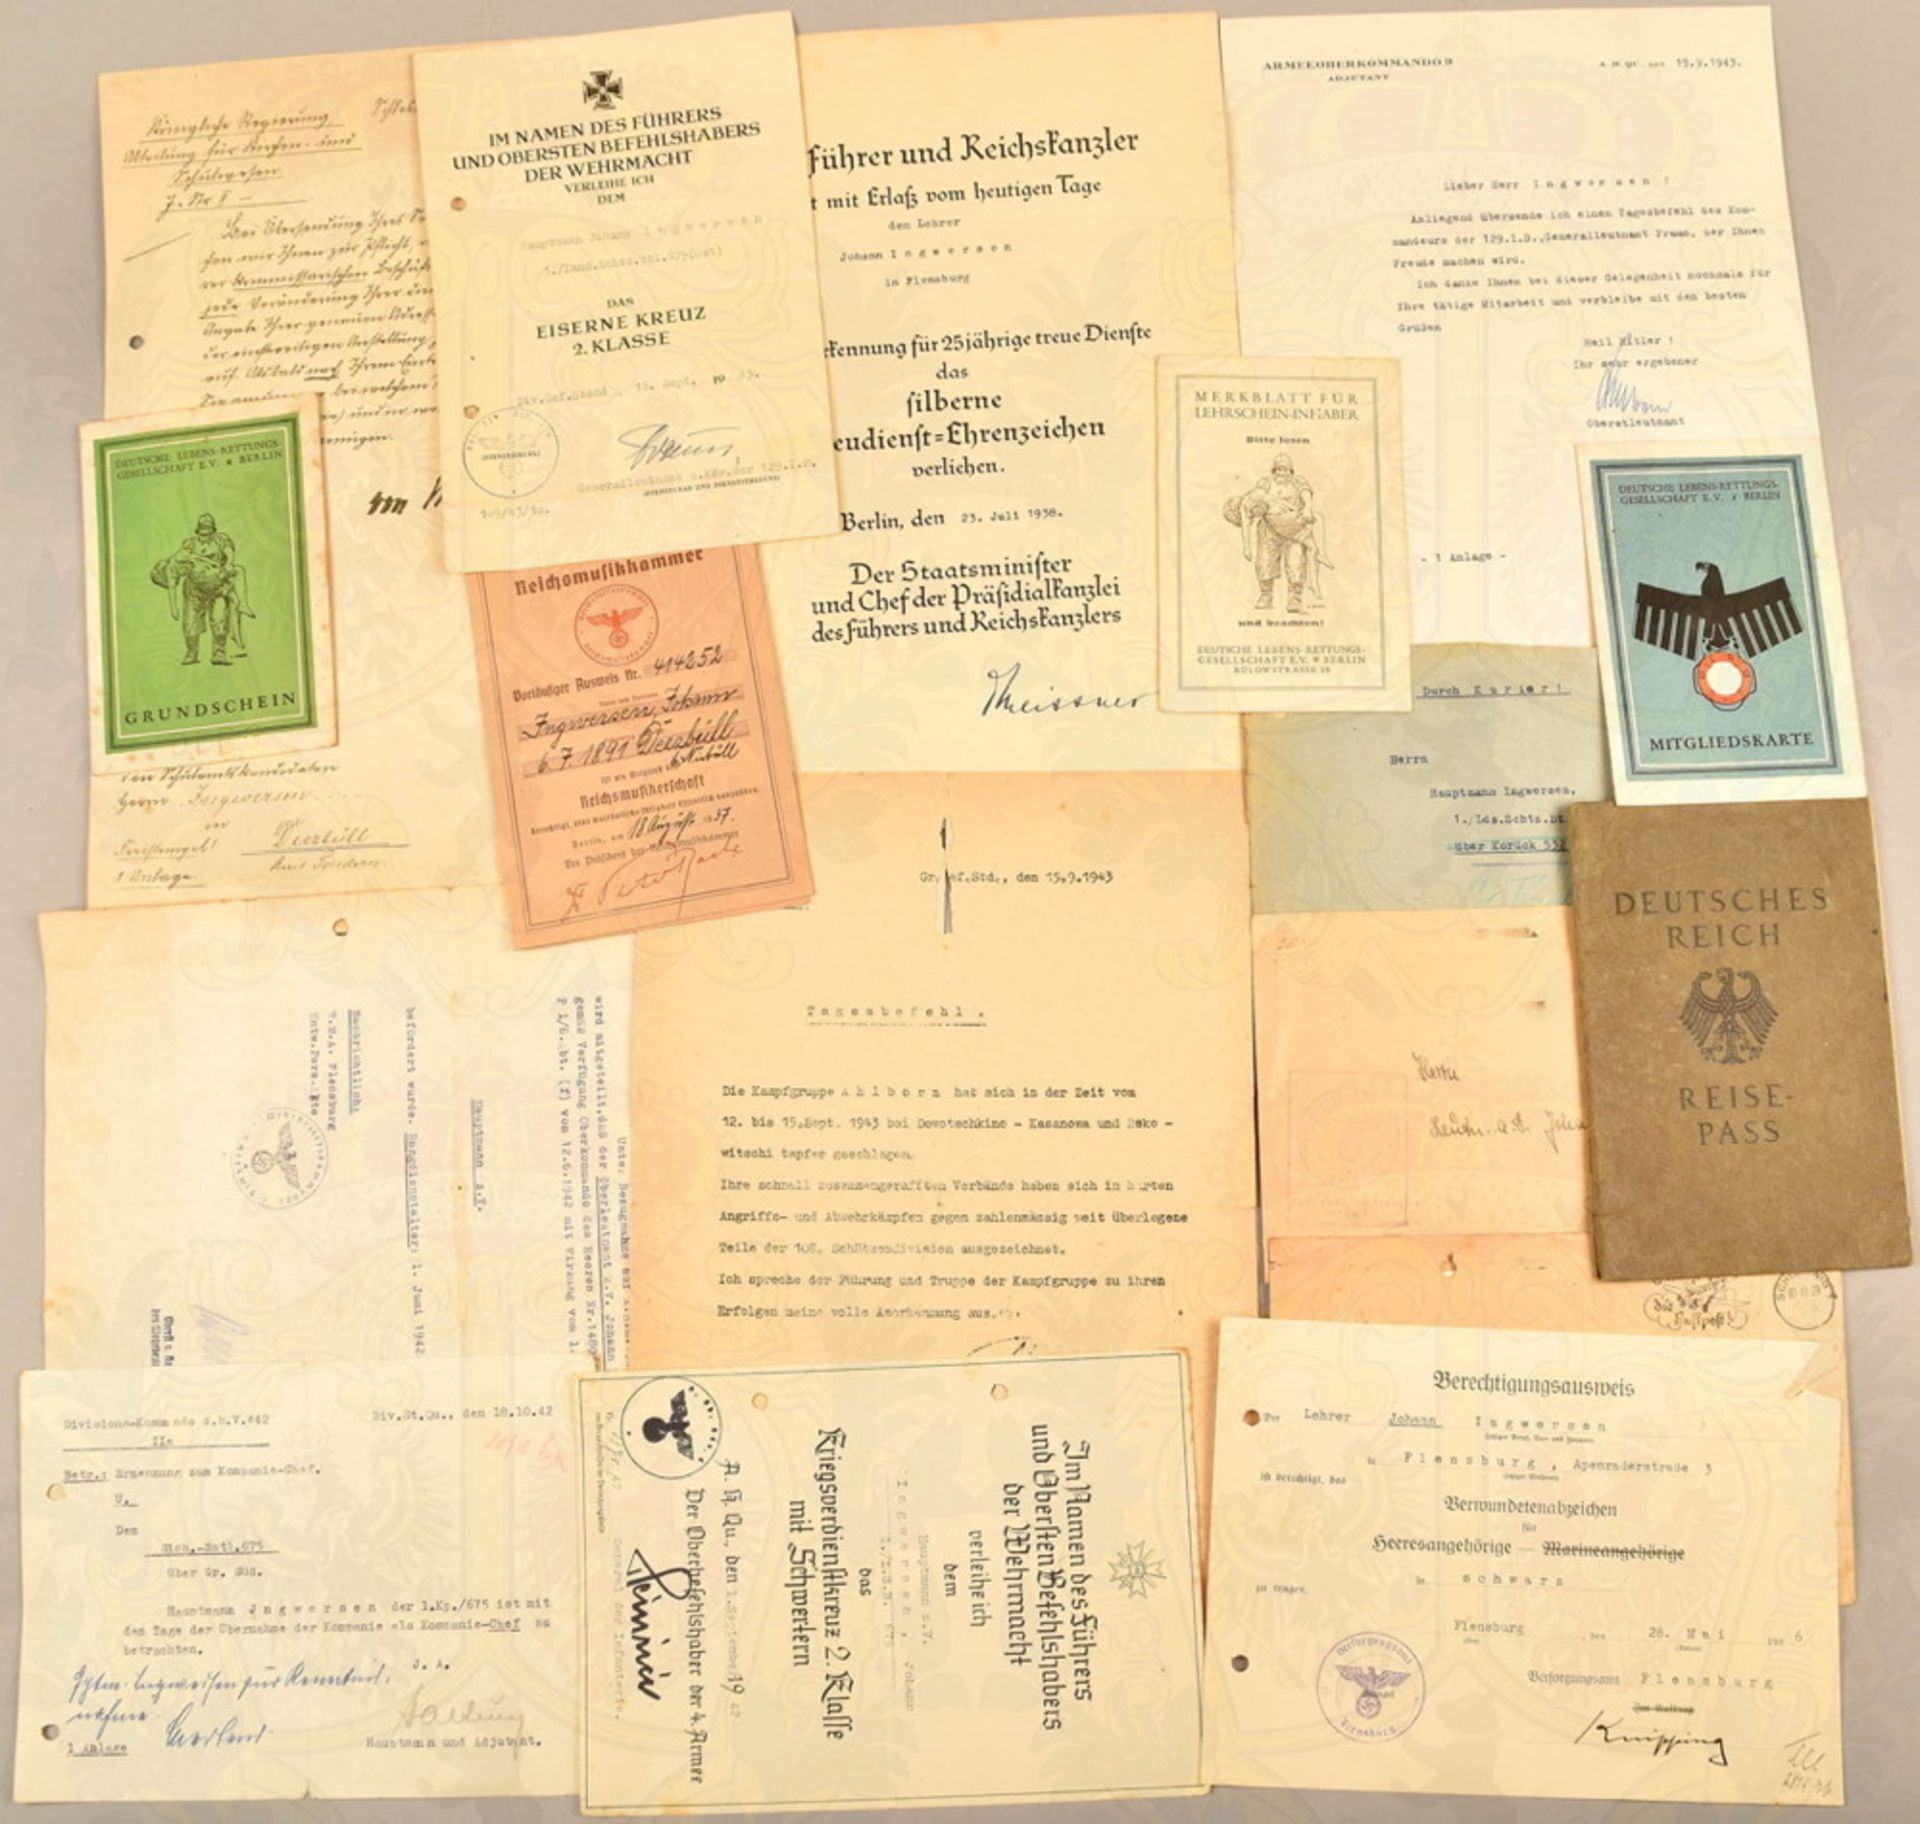 Estate of award certificates and documents of a Wehrmacht captain - Image 2 of 2